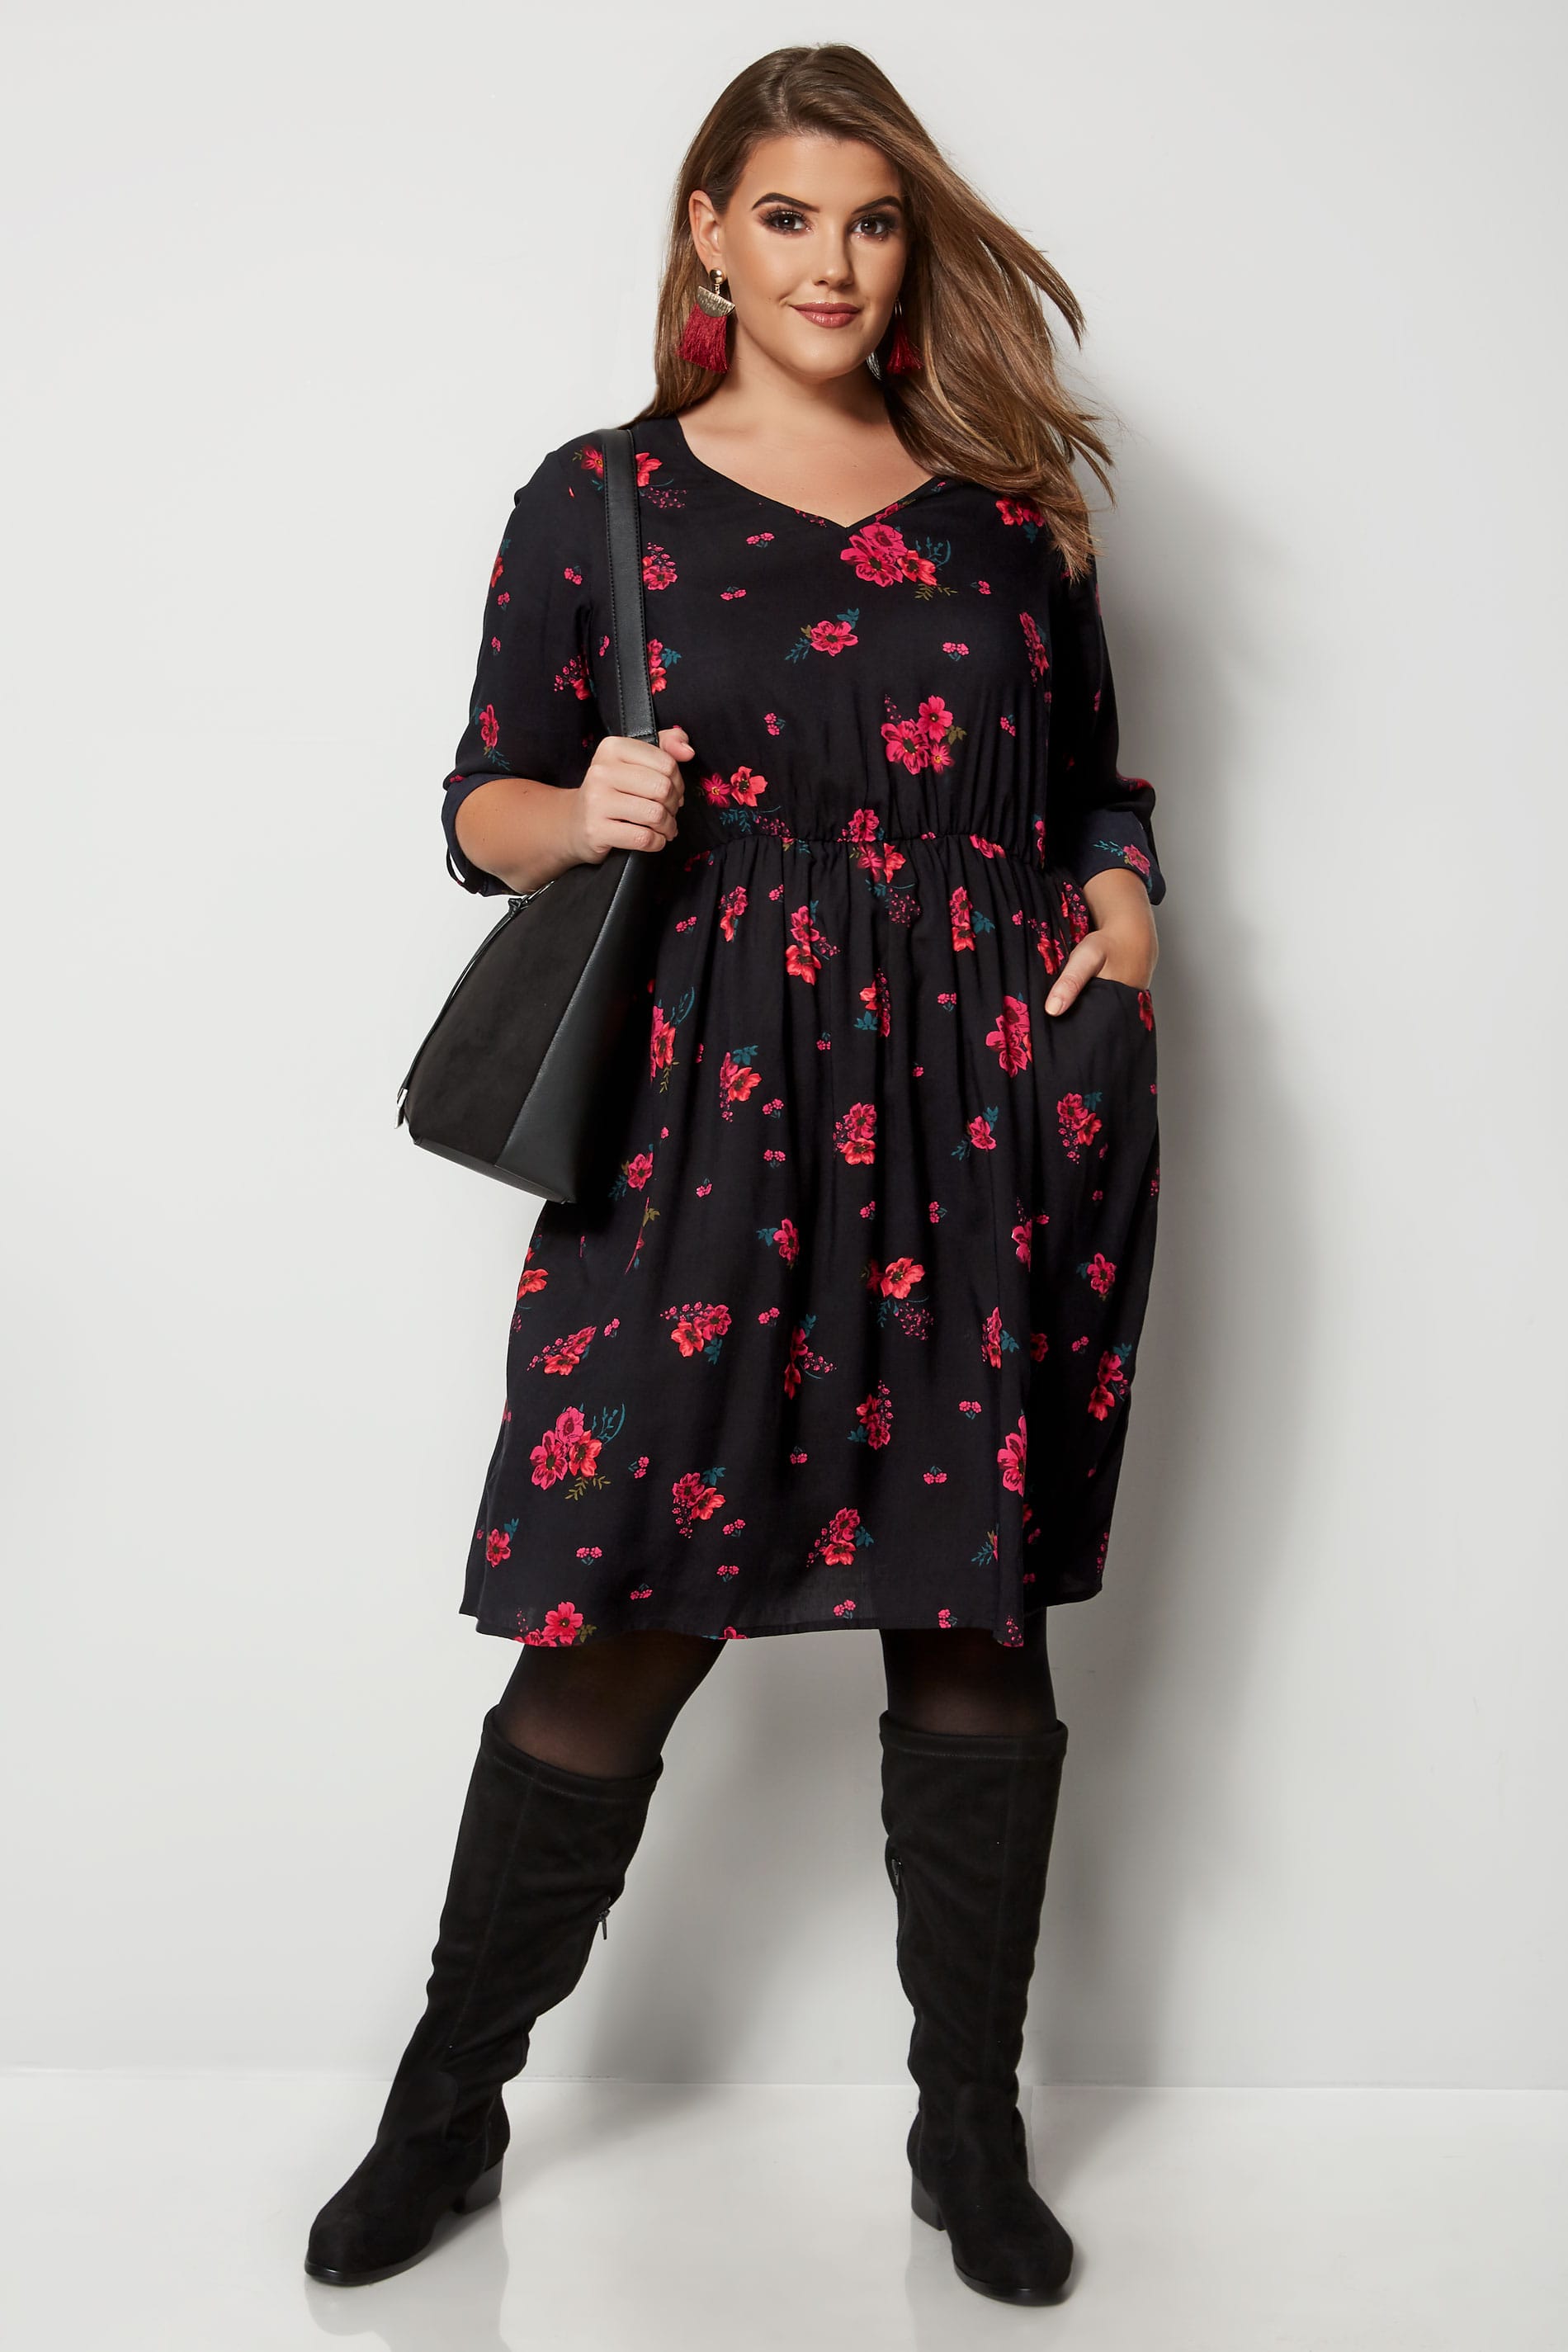 Black & Red Floral Print Dress, plus size 16 to 36